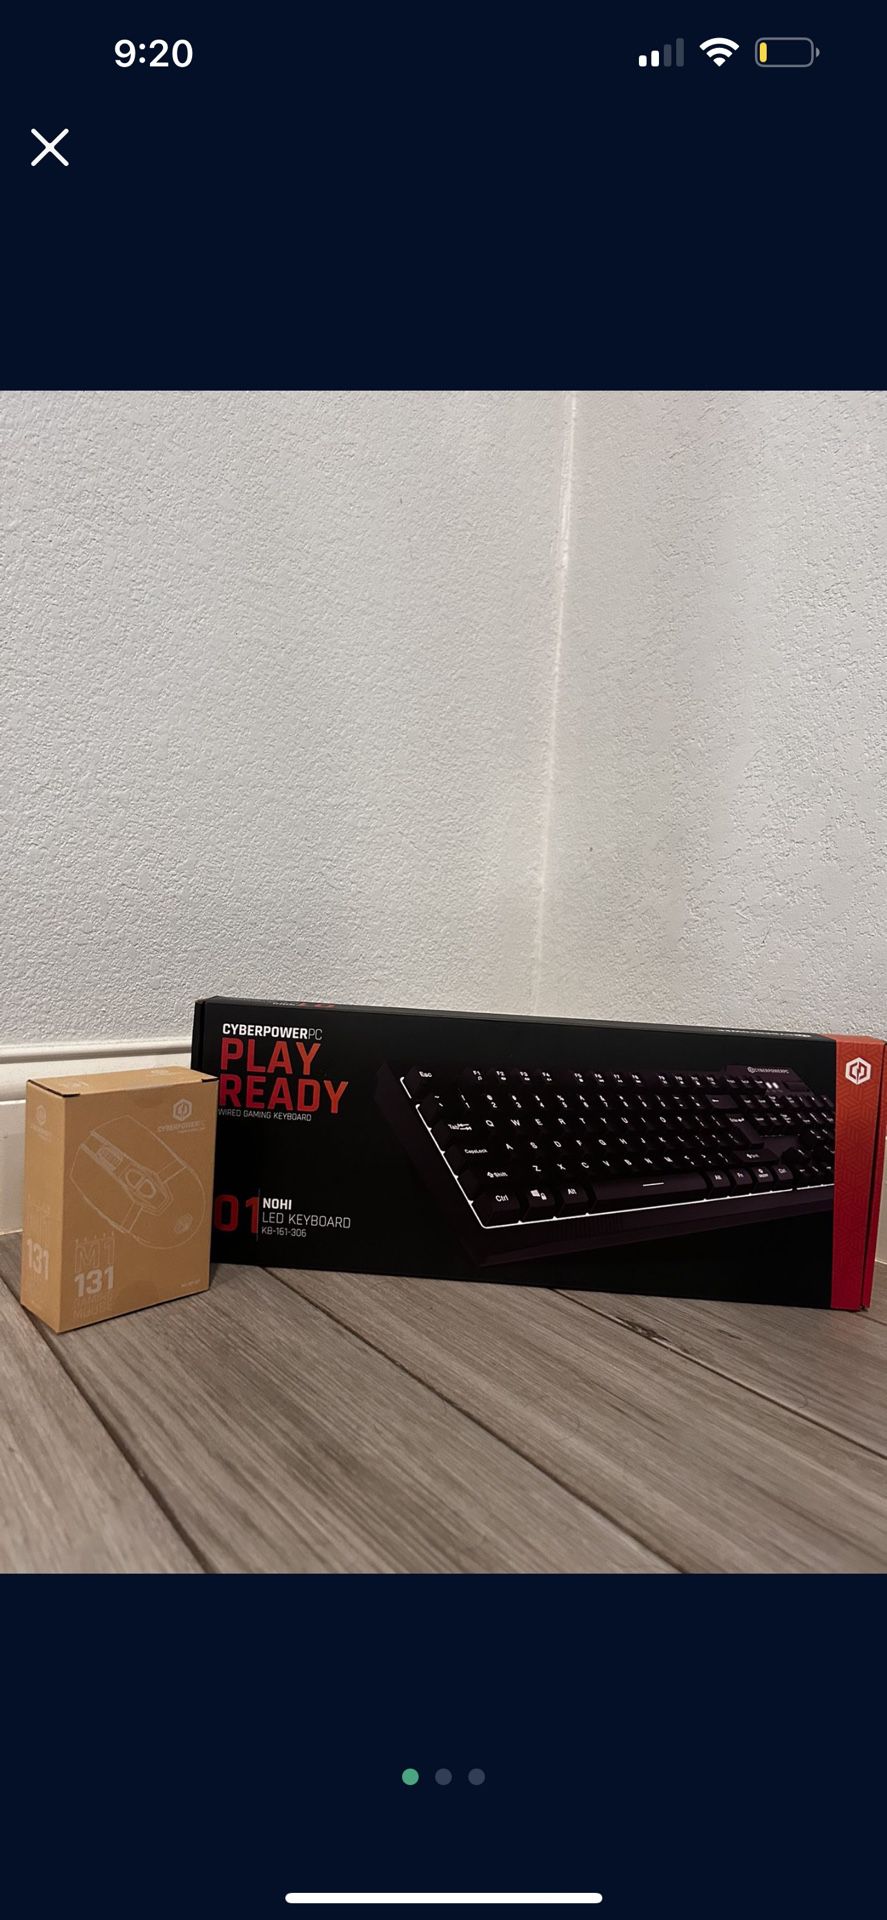 New gaming keyboard and mouse